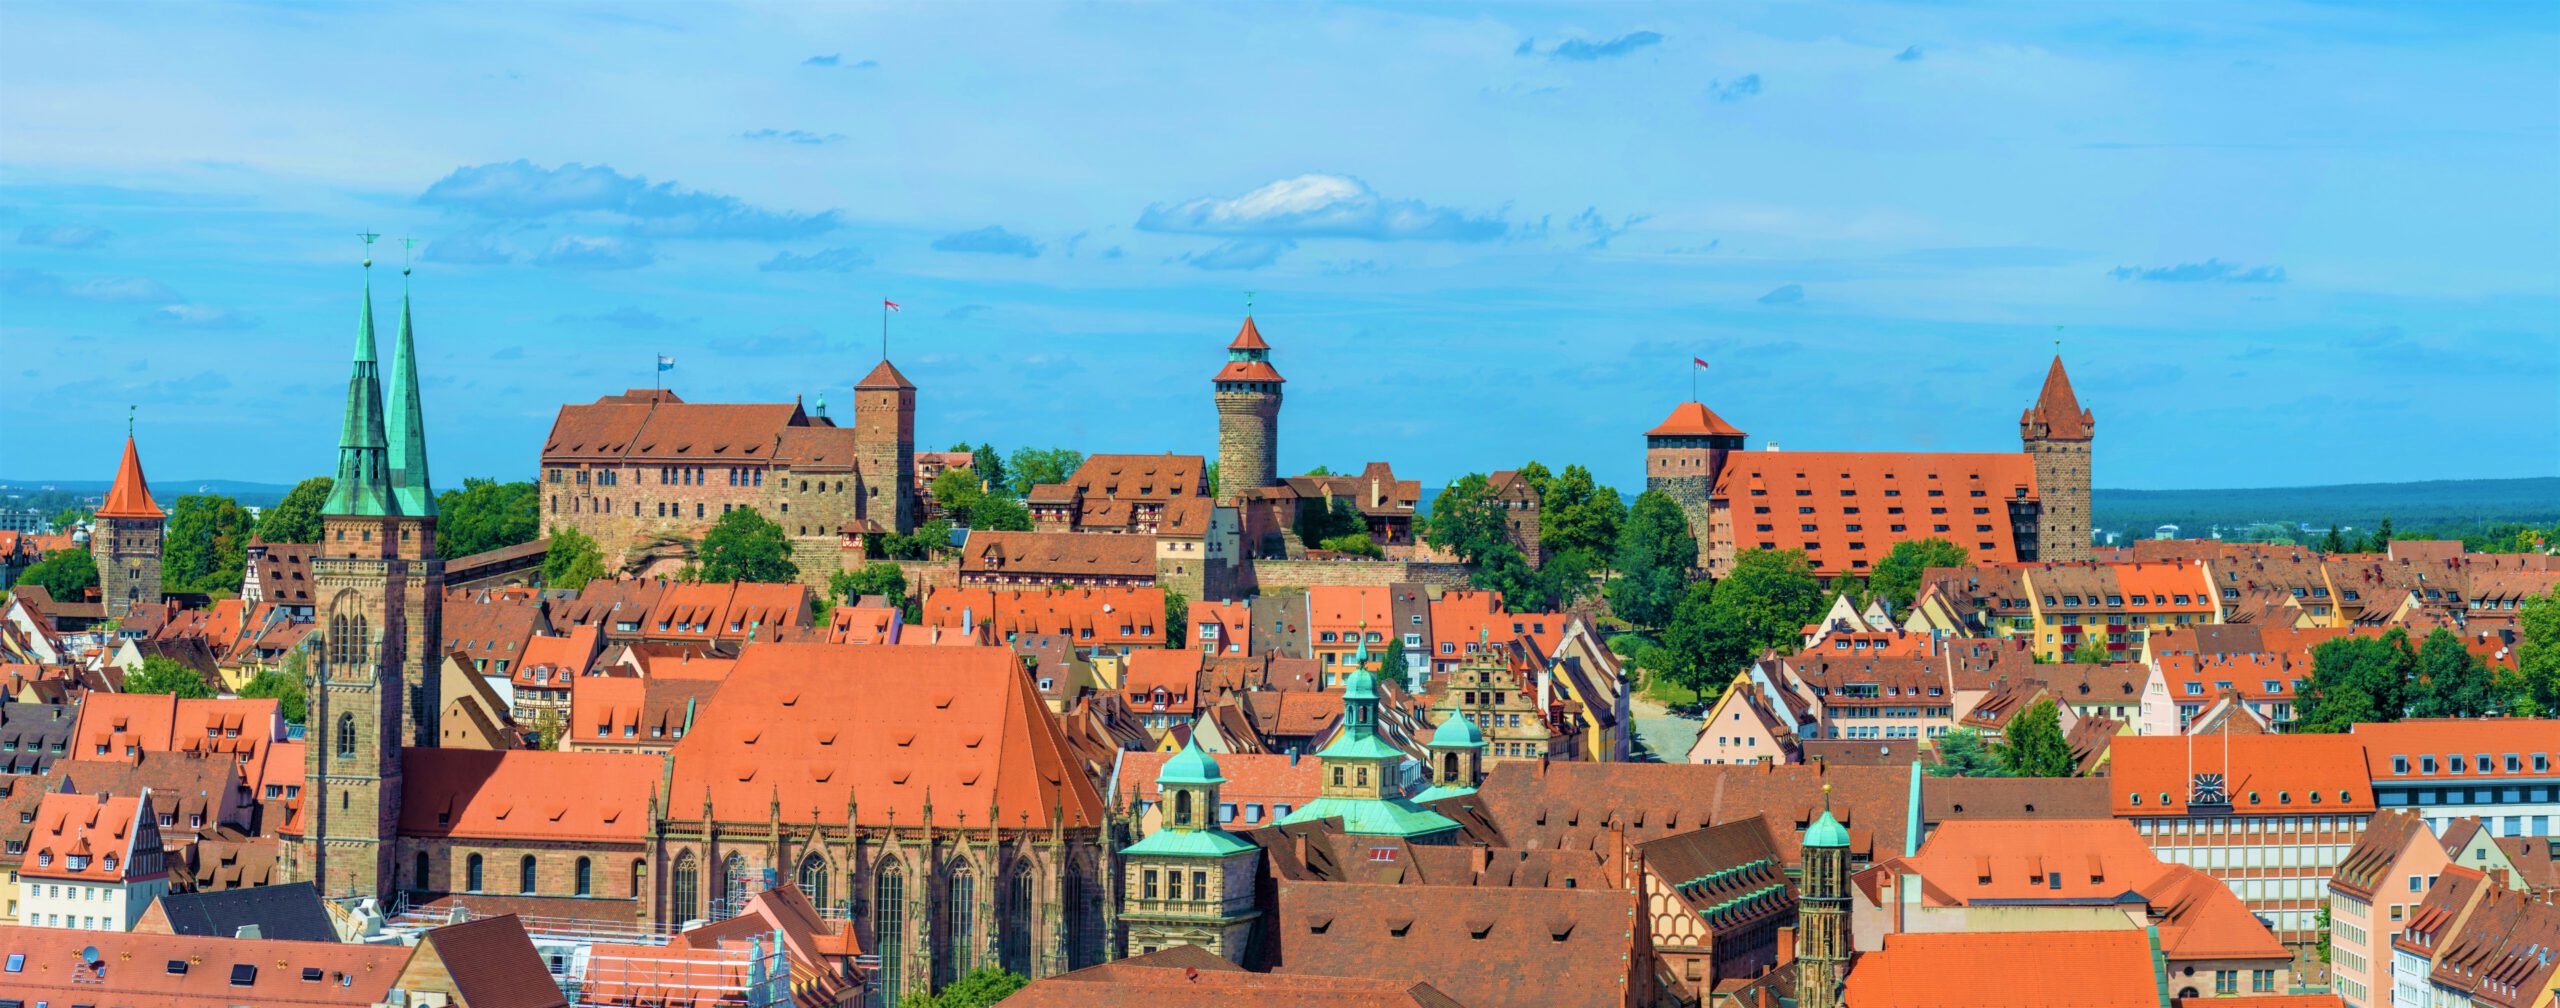 Panorama of the famous castle of Nuremberg and Sebaldus church on a sunny day